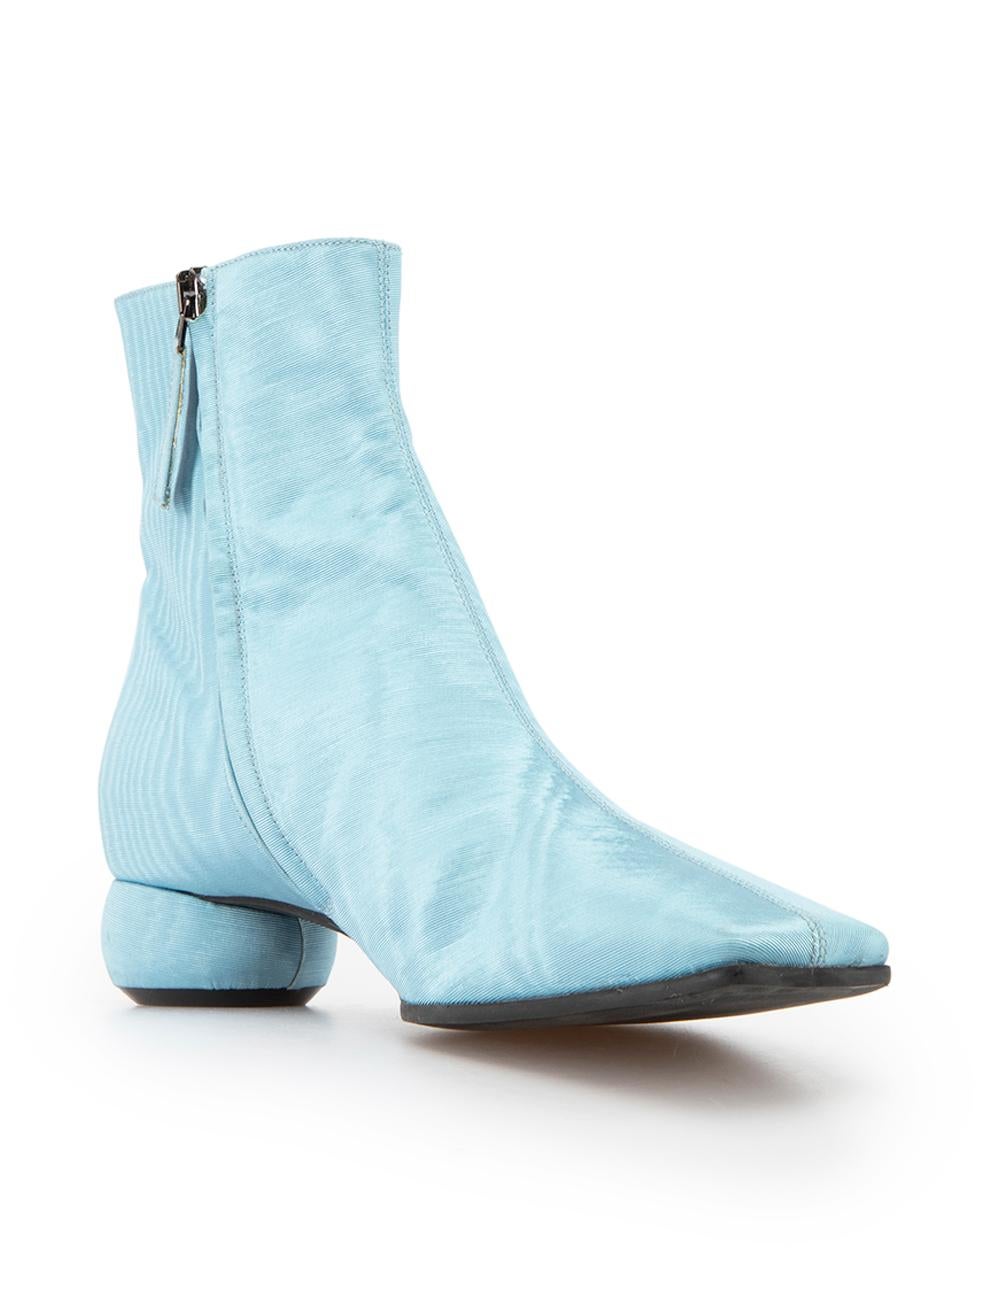 CONDITION is Very good. Minimal wear to boots is evident. Minimal wear to upper with one or two very small marks found, outsole also shows signs of light use on this used ELLERY designer resale item.
  
Details
Blue
Cloth
Ankle boots
Moire